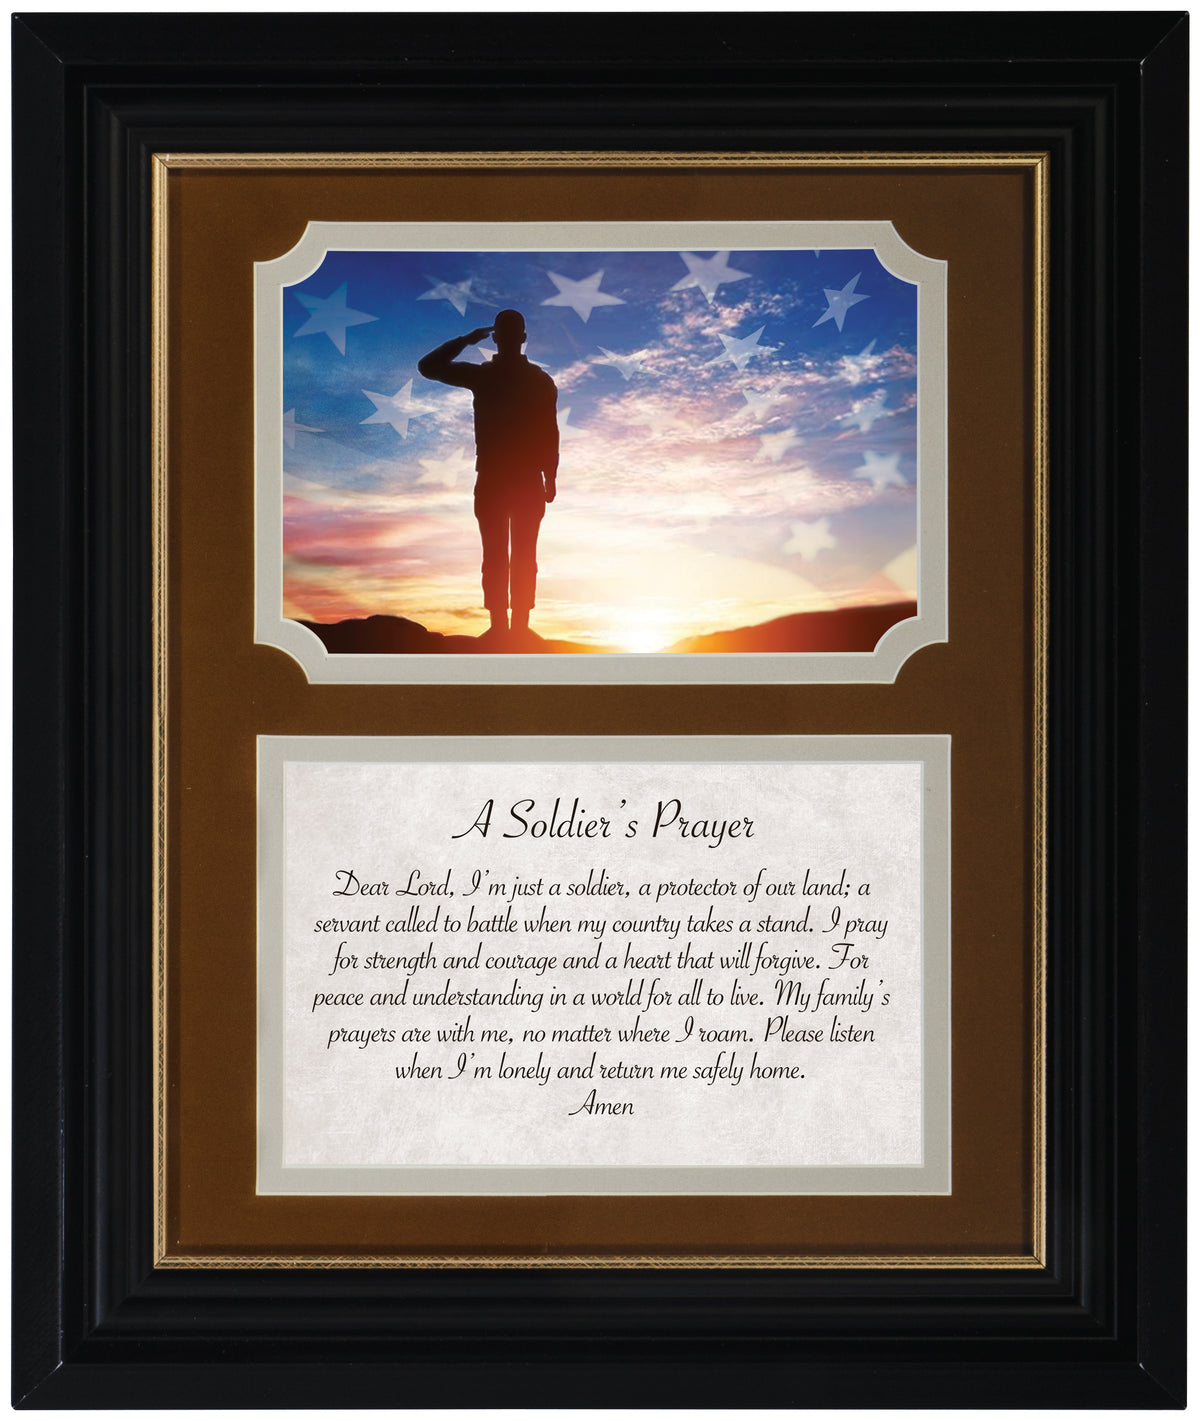 Prayer for Troops Card